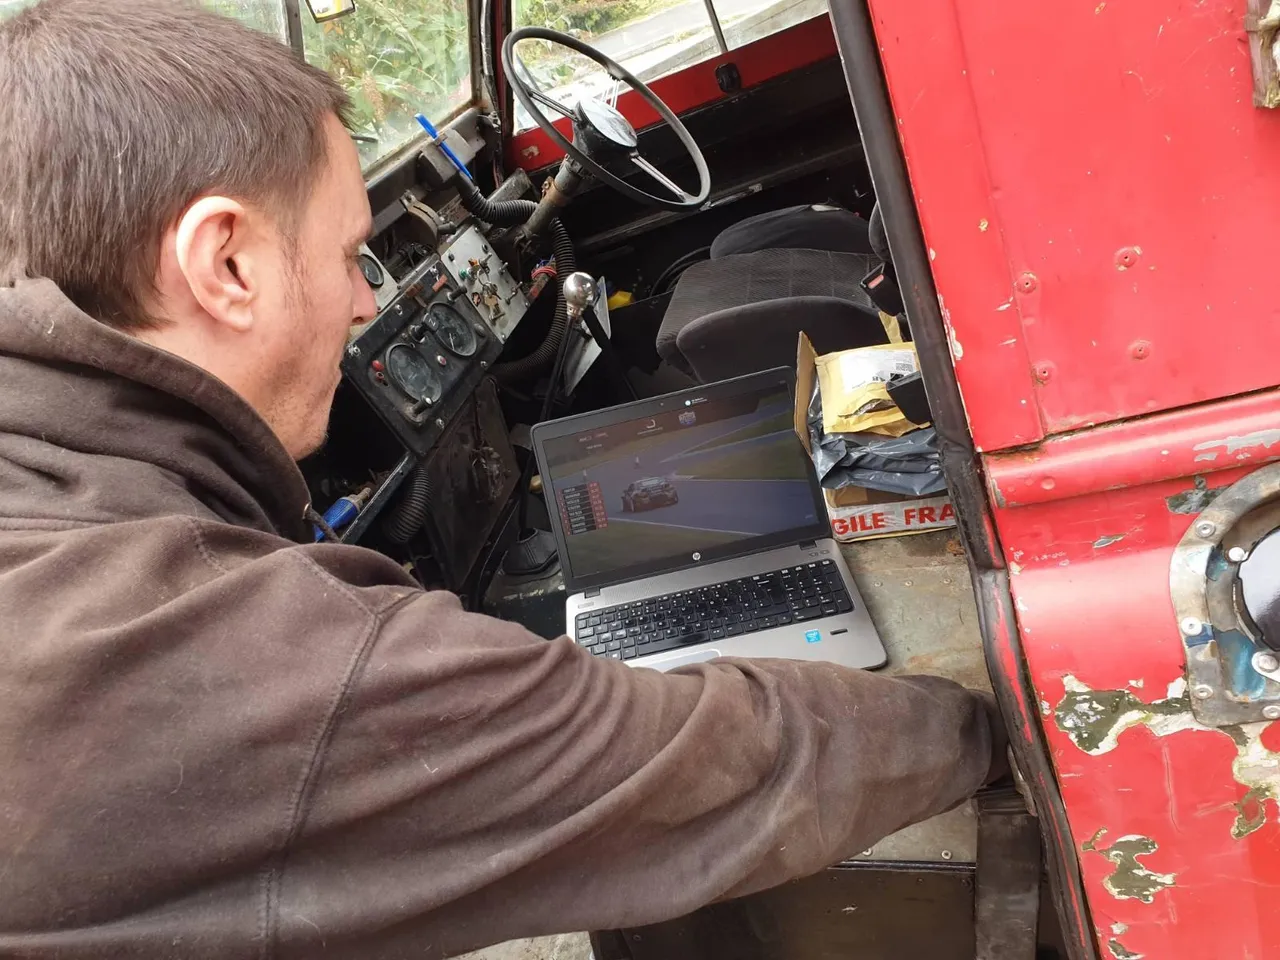 Me, watching a British Drift Championship livestream while working on the Land Rover.